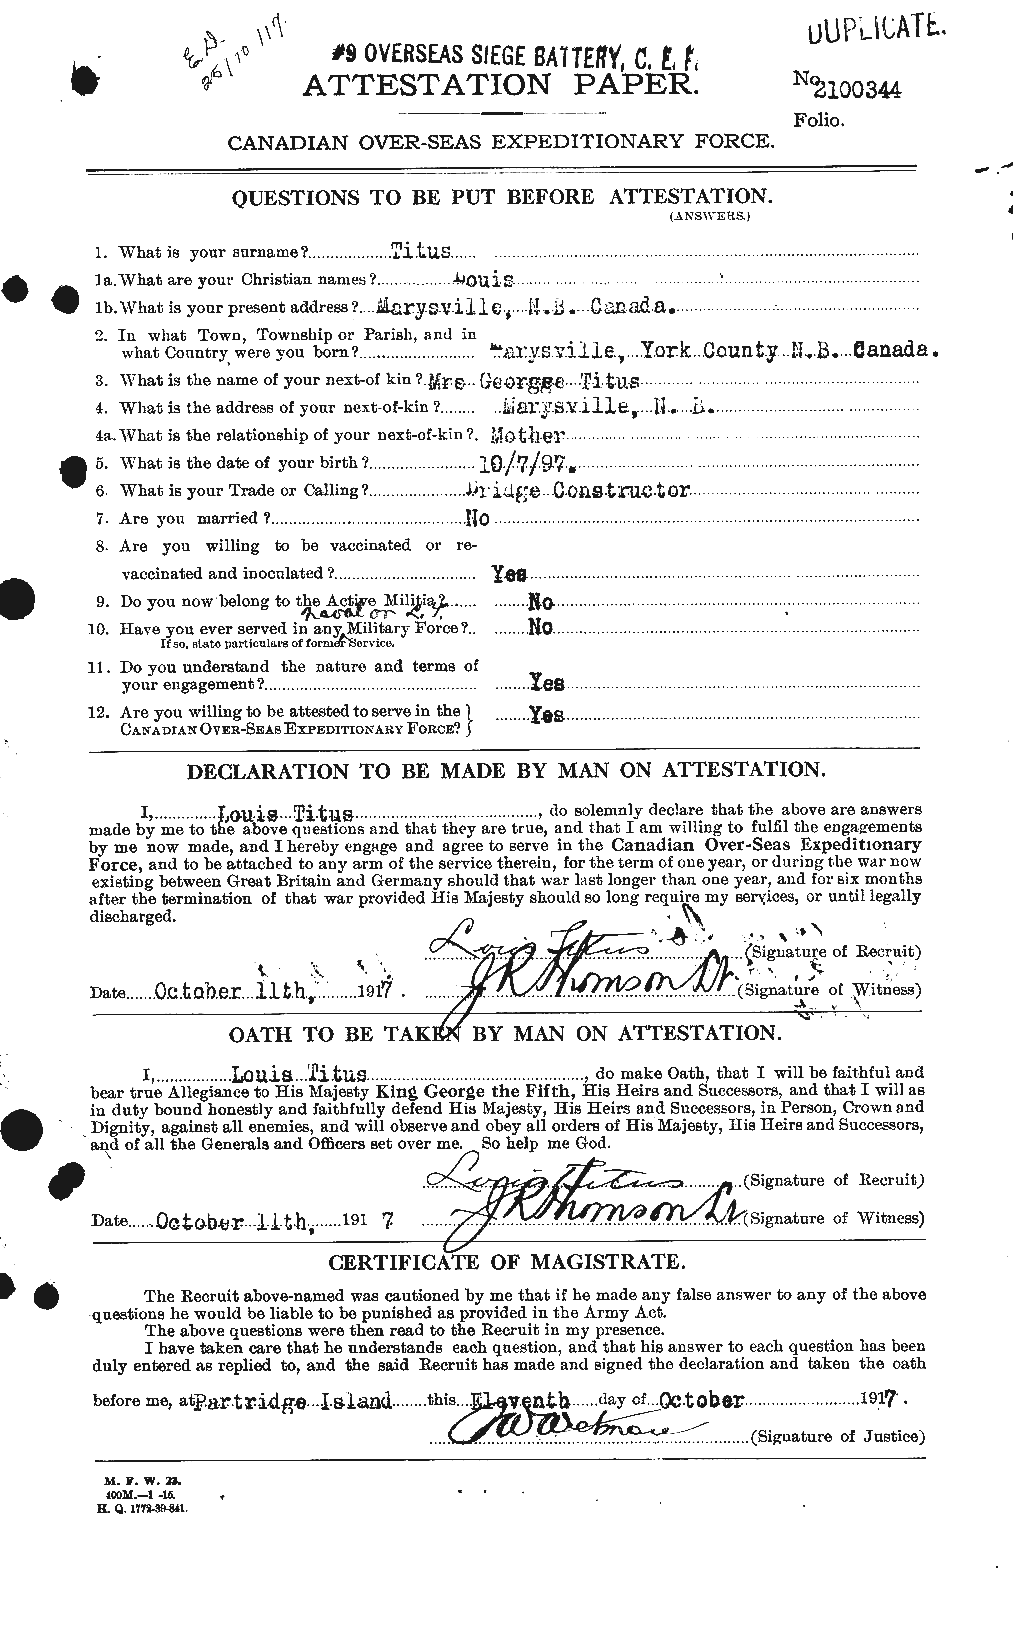 Personnel Records of the First World War - CEF 634976a